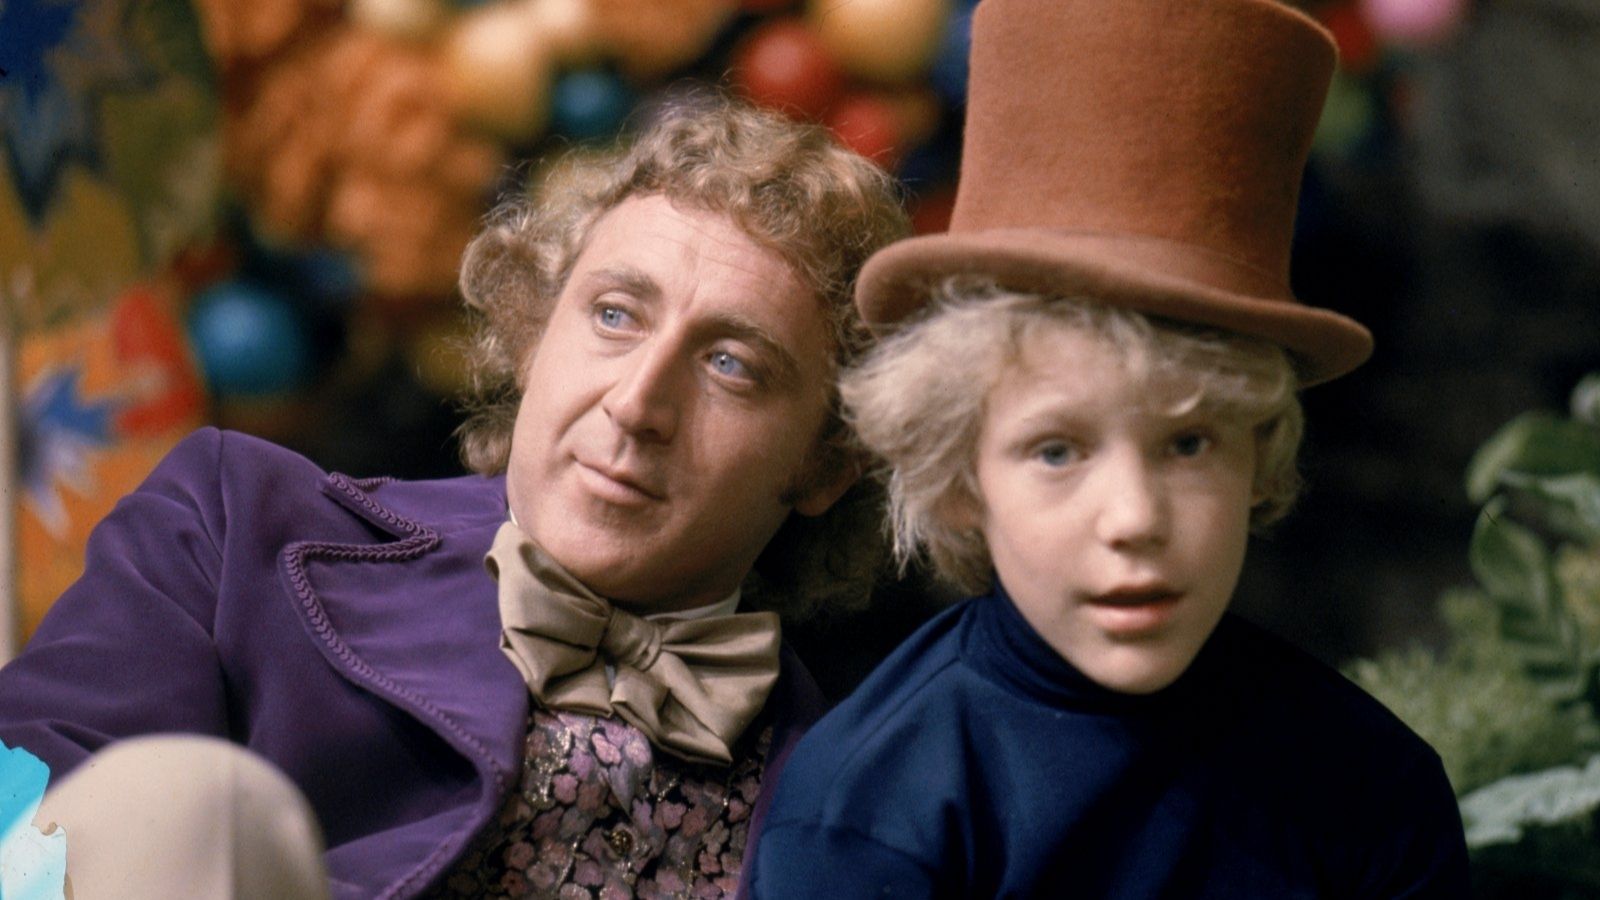 Willy Wonka on the left and Charlie Bucket on the right in a top hat